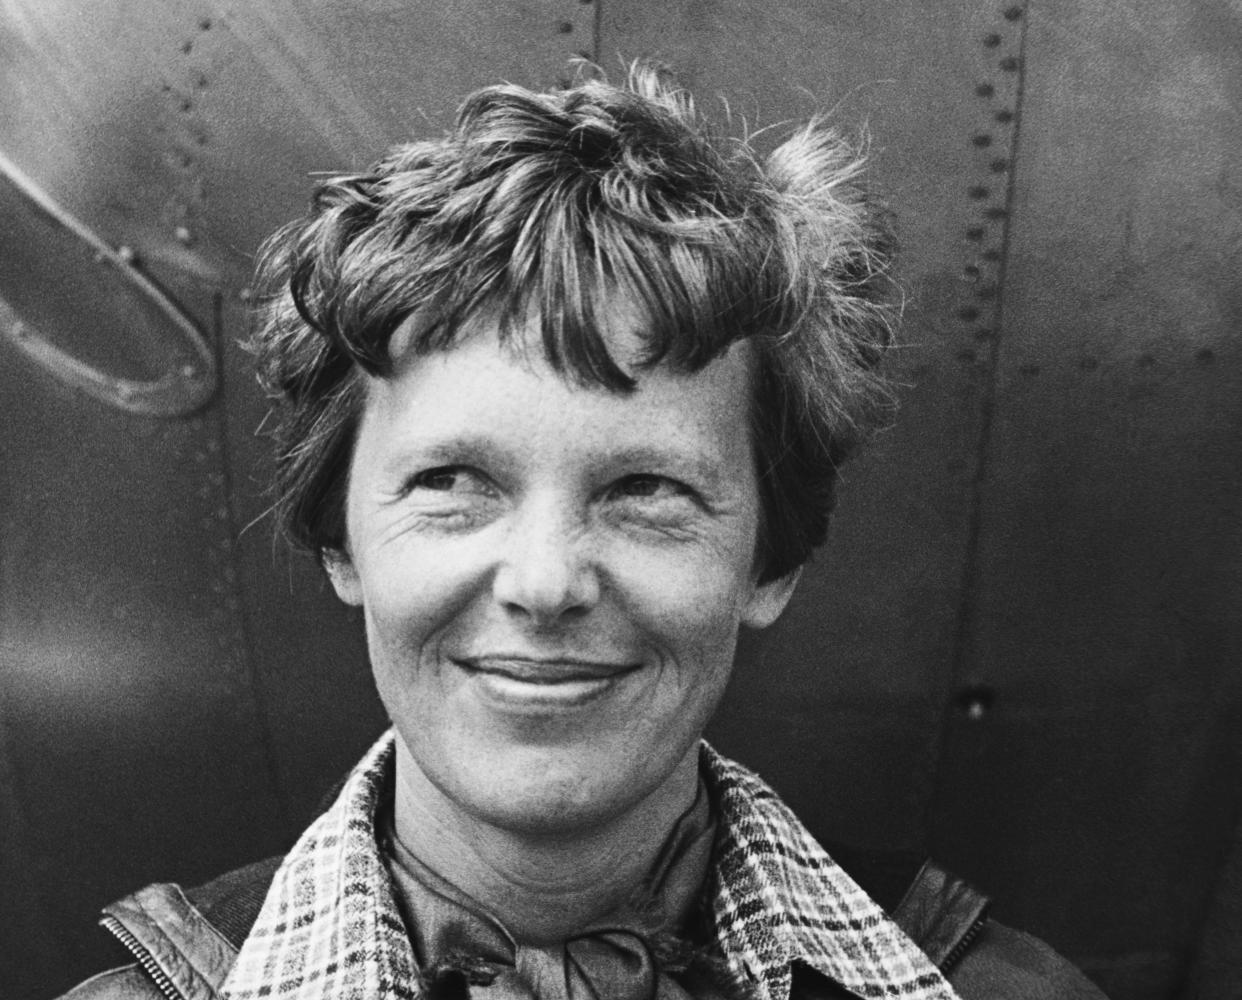 Portrait of American aviatrix Amelia Earhart (1898-1937), made before her intended trip around the world.